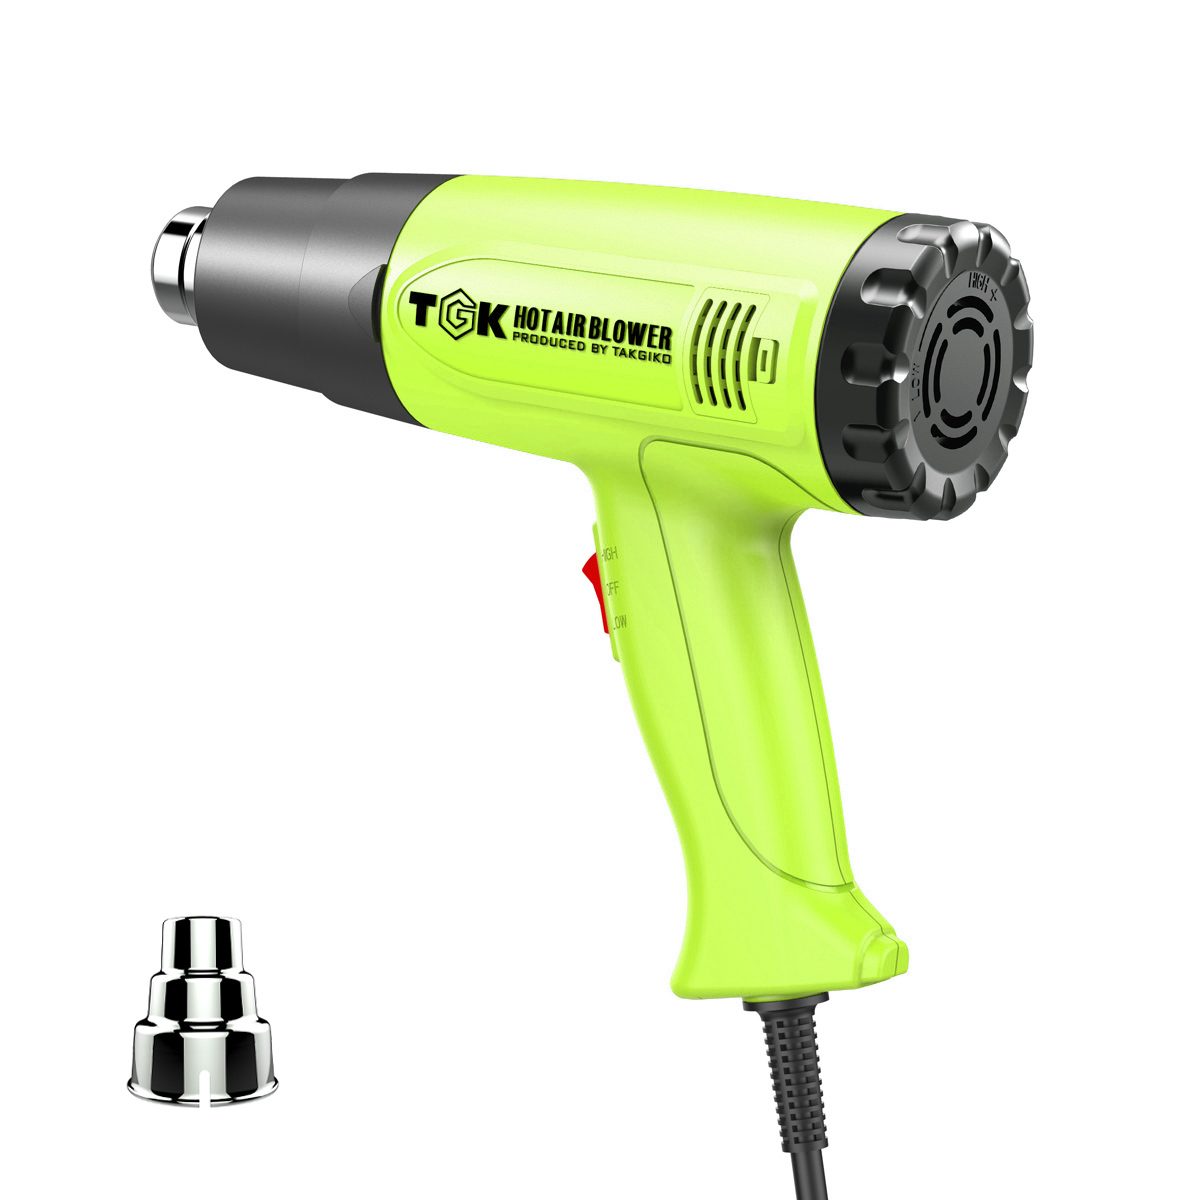 Lowest Price for Hot Air Torch Plastic Welding Gun - HG3320S – Takgiko